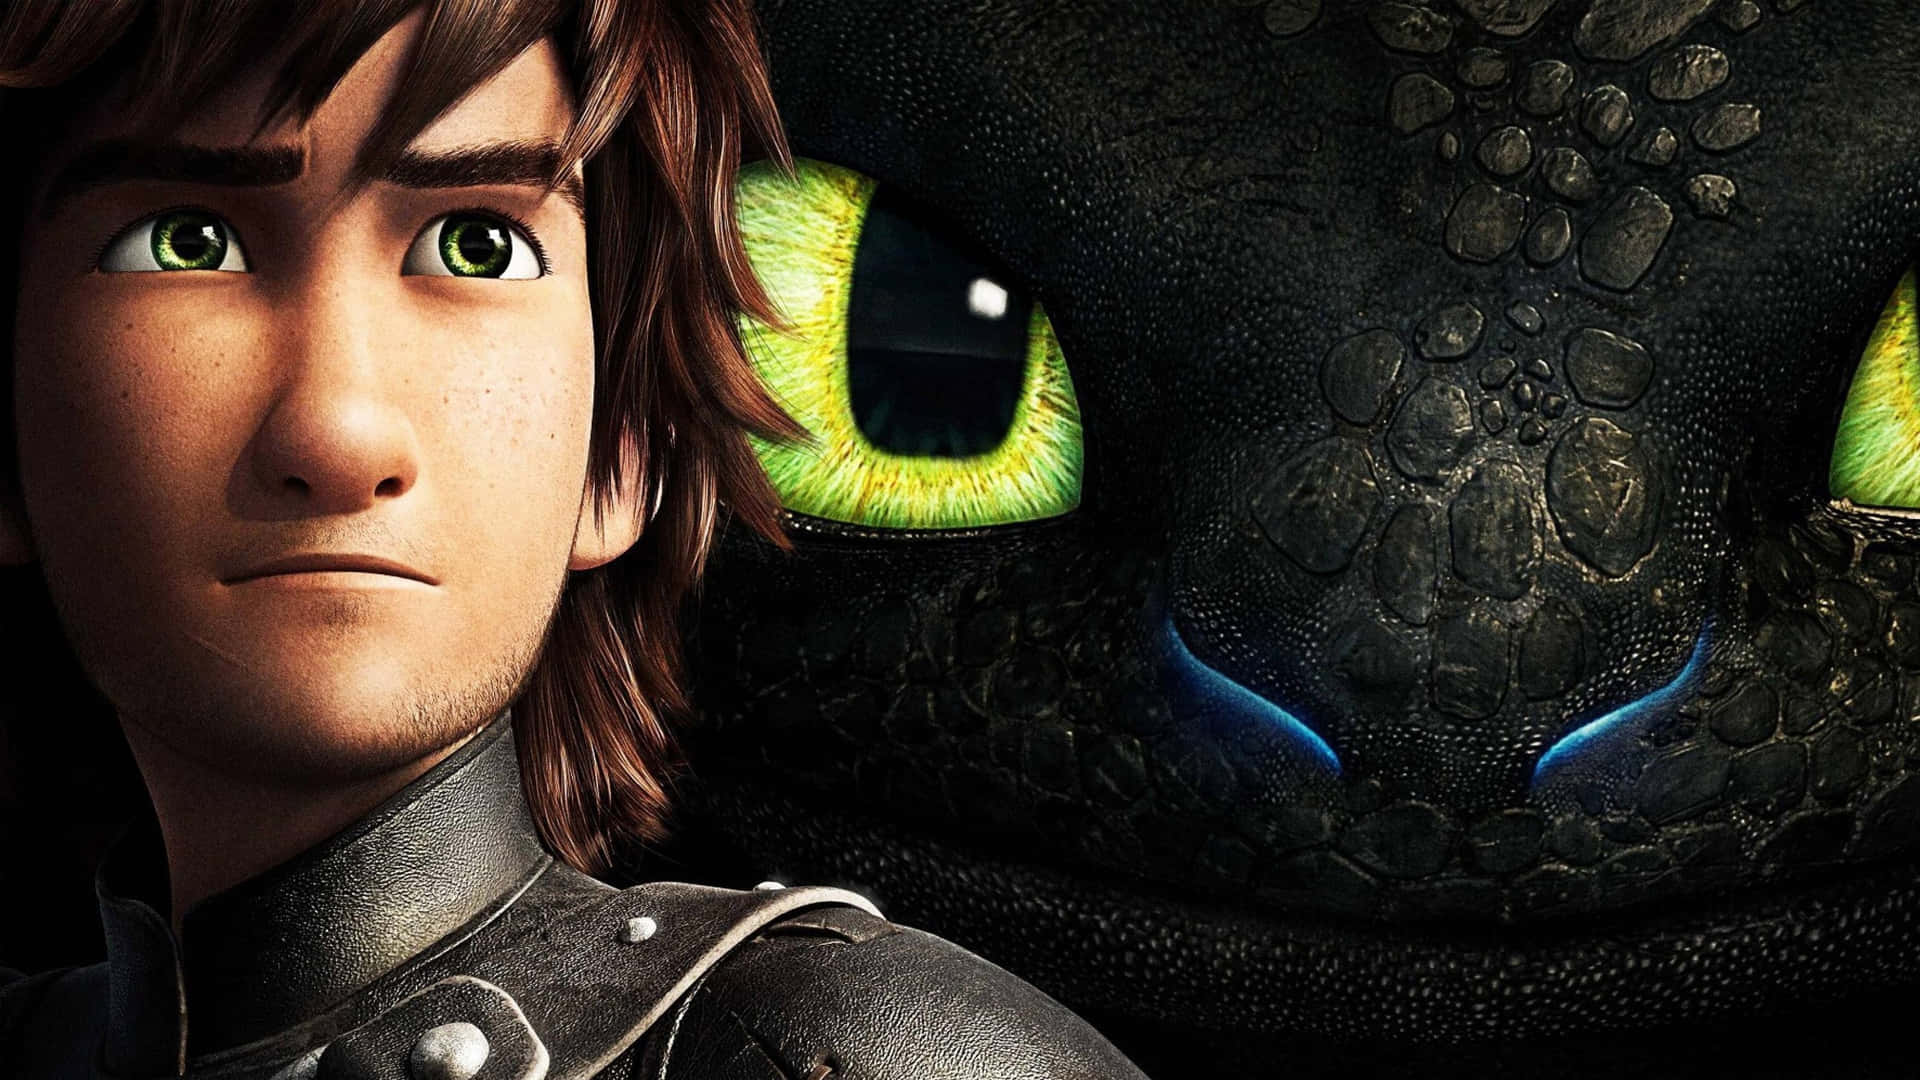 How To Train Your Dragon 2 - A Boy And A Dragon Wallpaper